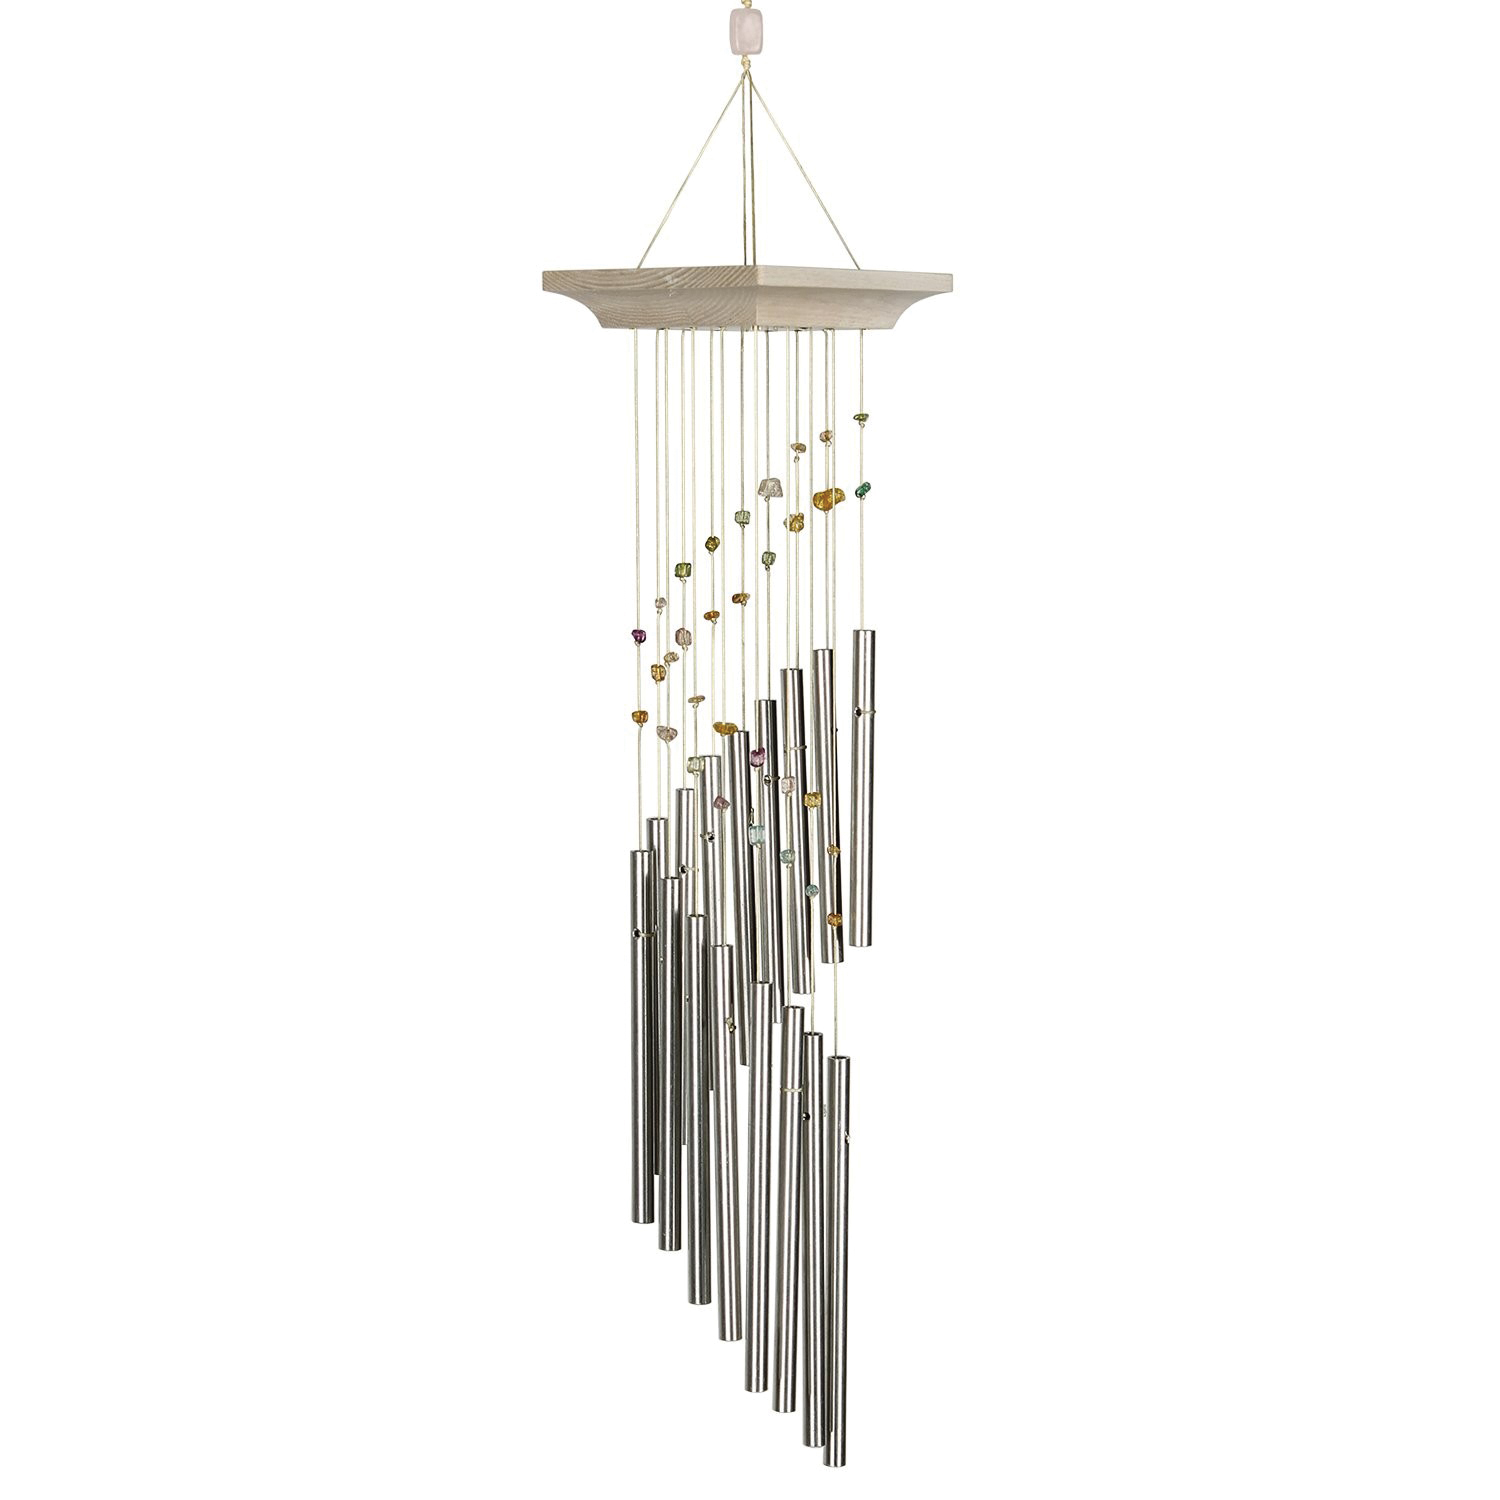 MSC Wind Chime, Confetti Mystic Spiral, Aluminum, Silver, White Wash, Hanging Mounting